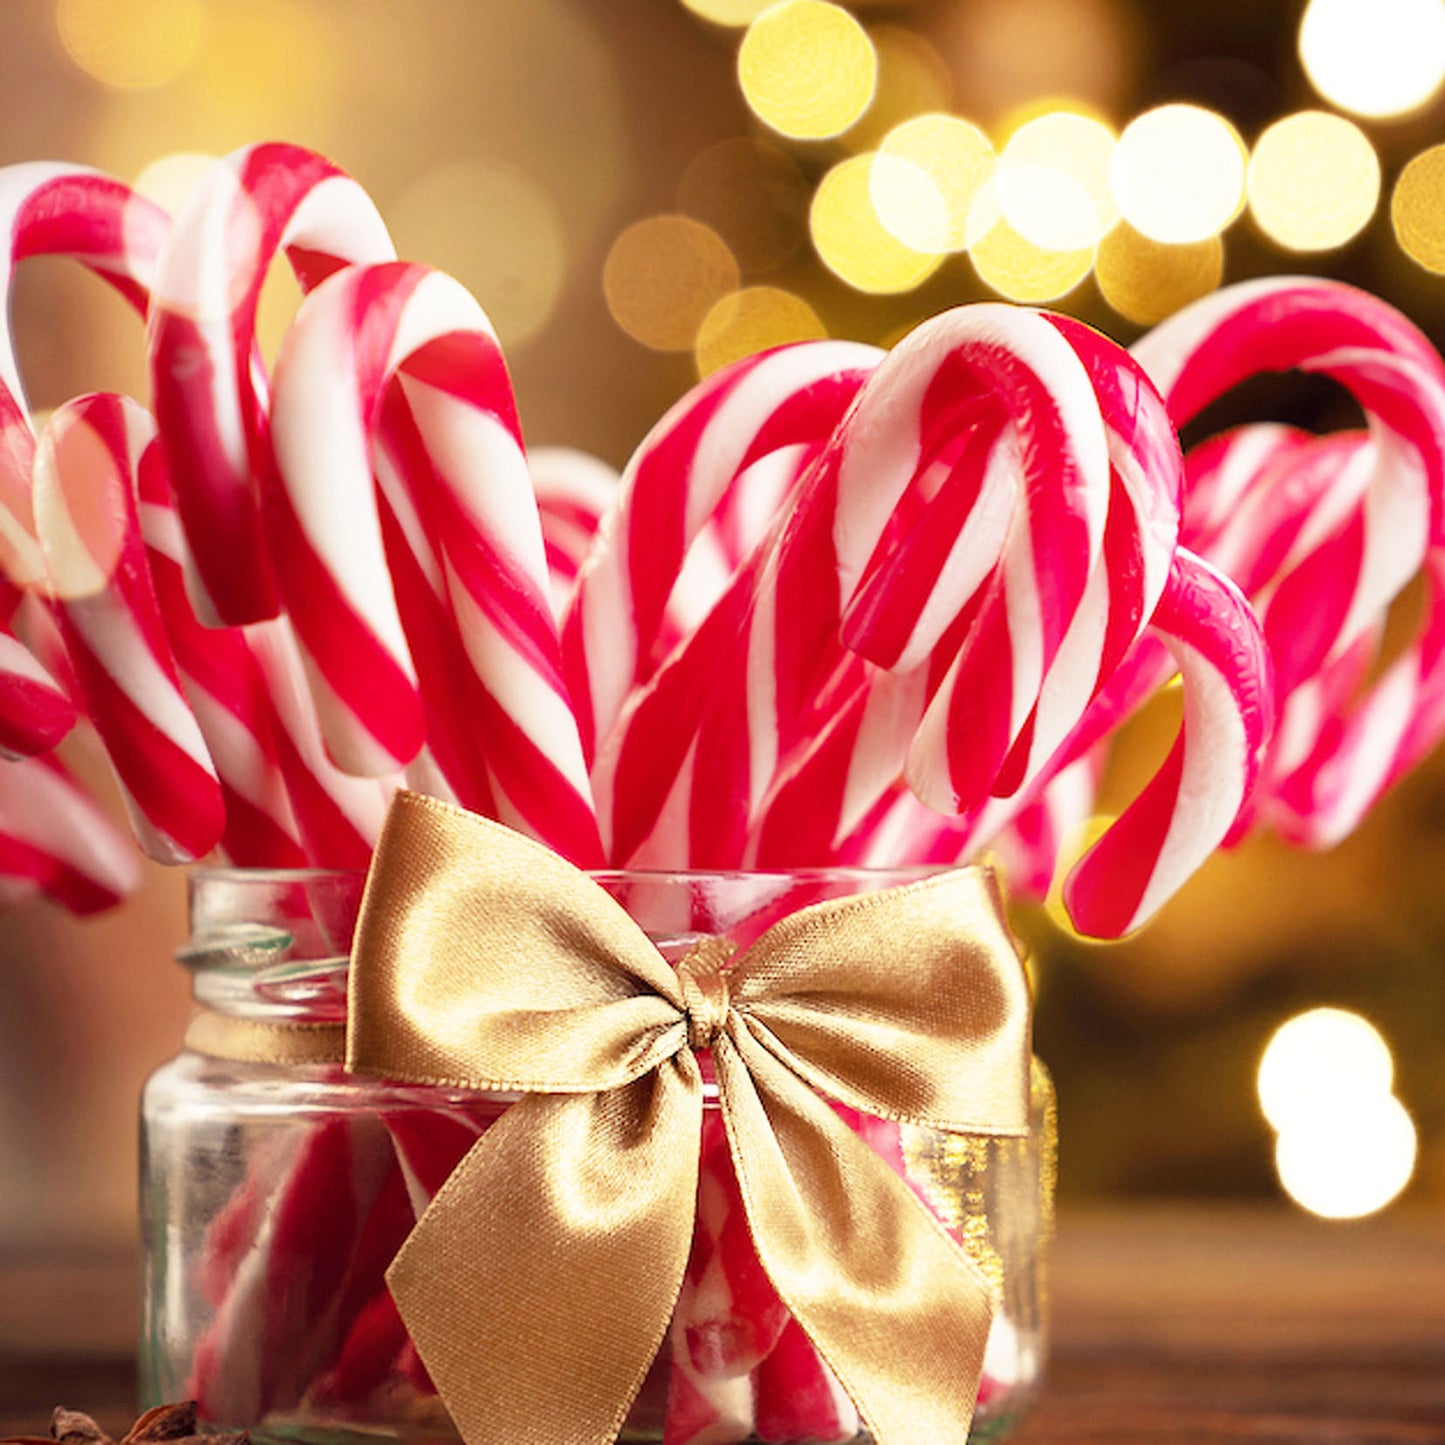 Candy Cane Fragrance Oil | Truly Personal | Candles, Wax Melts, Soap, Bath Bombs